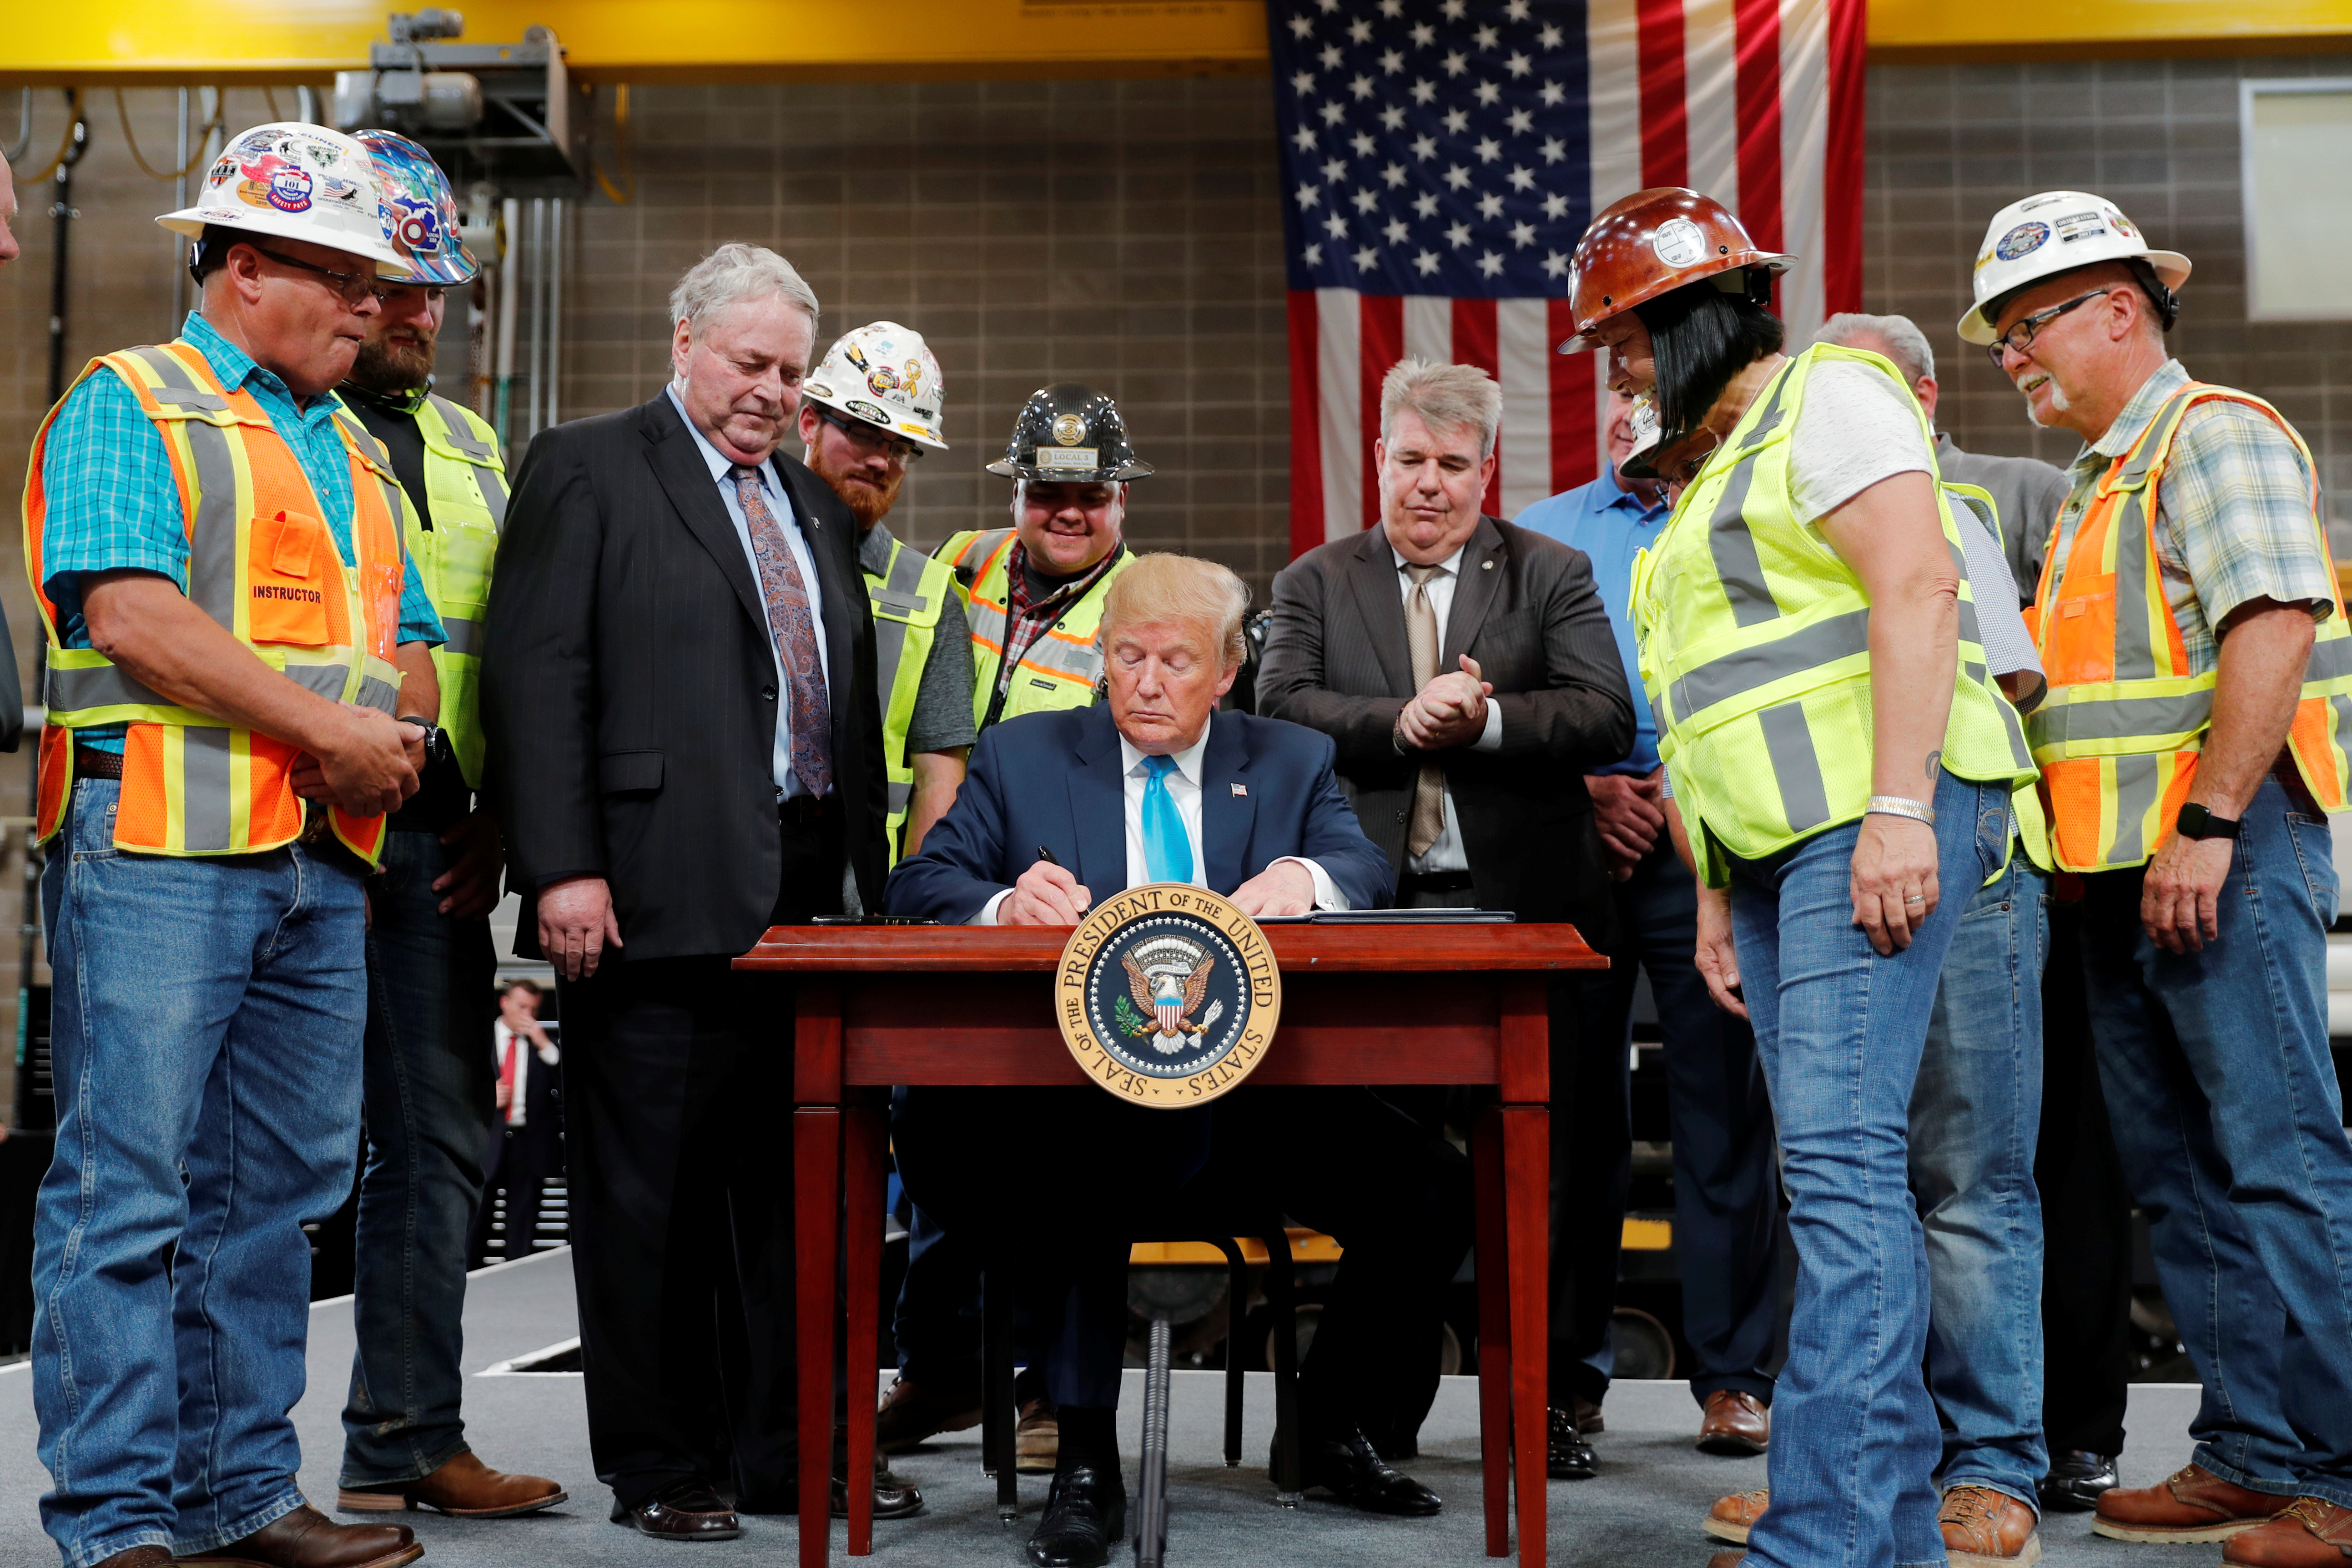 U.S. President Trump participates in energy and infrastructure executive order signing event in Crosby, Texas